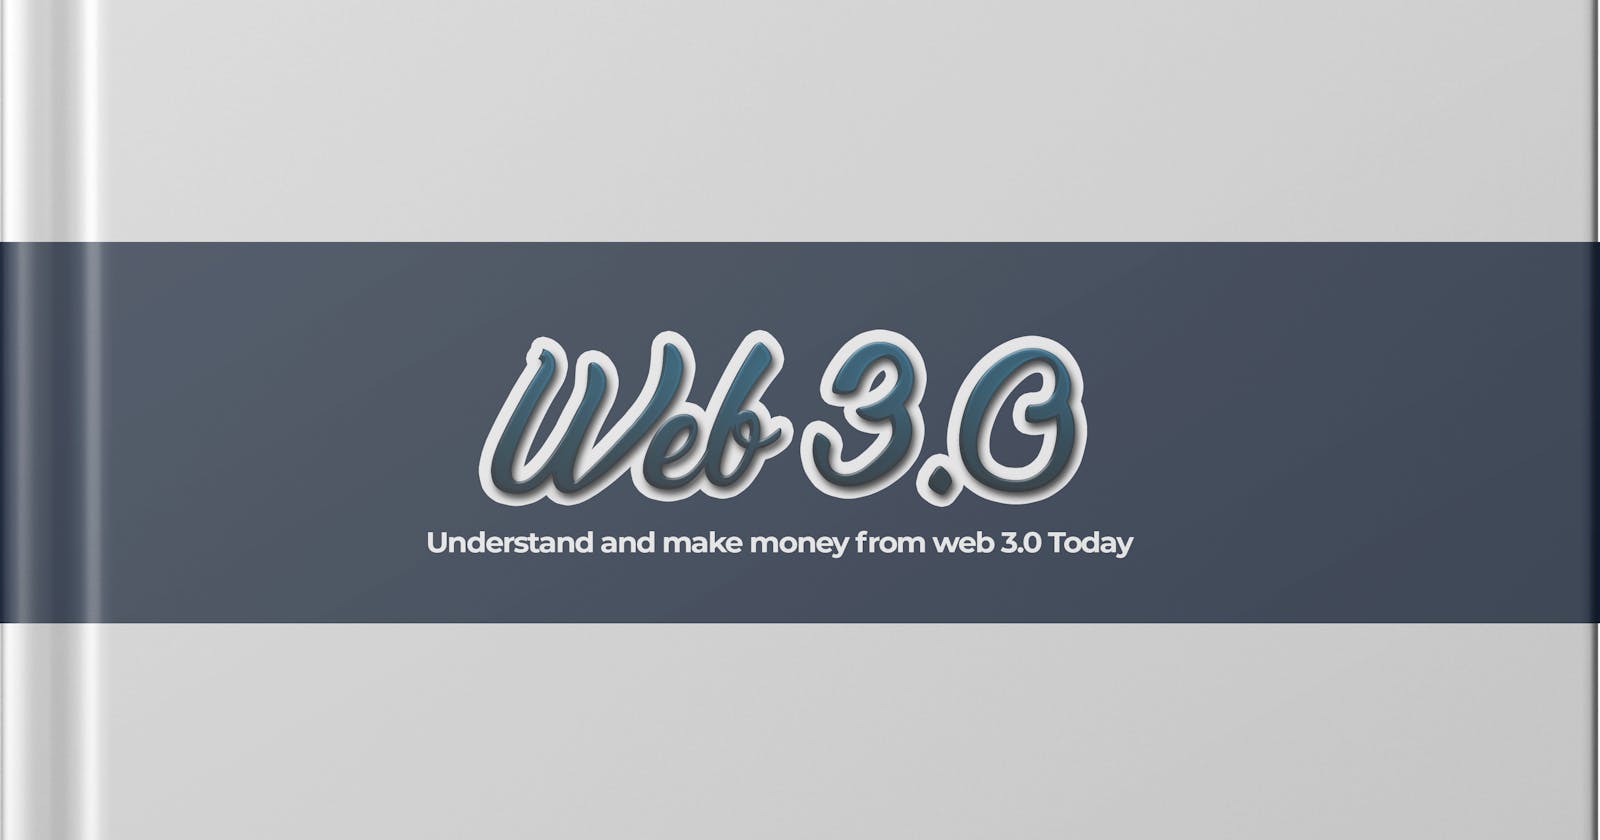 Understand and make money from Web 3.0 Today!